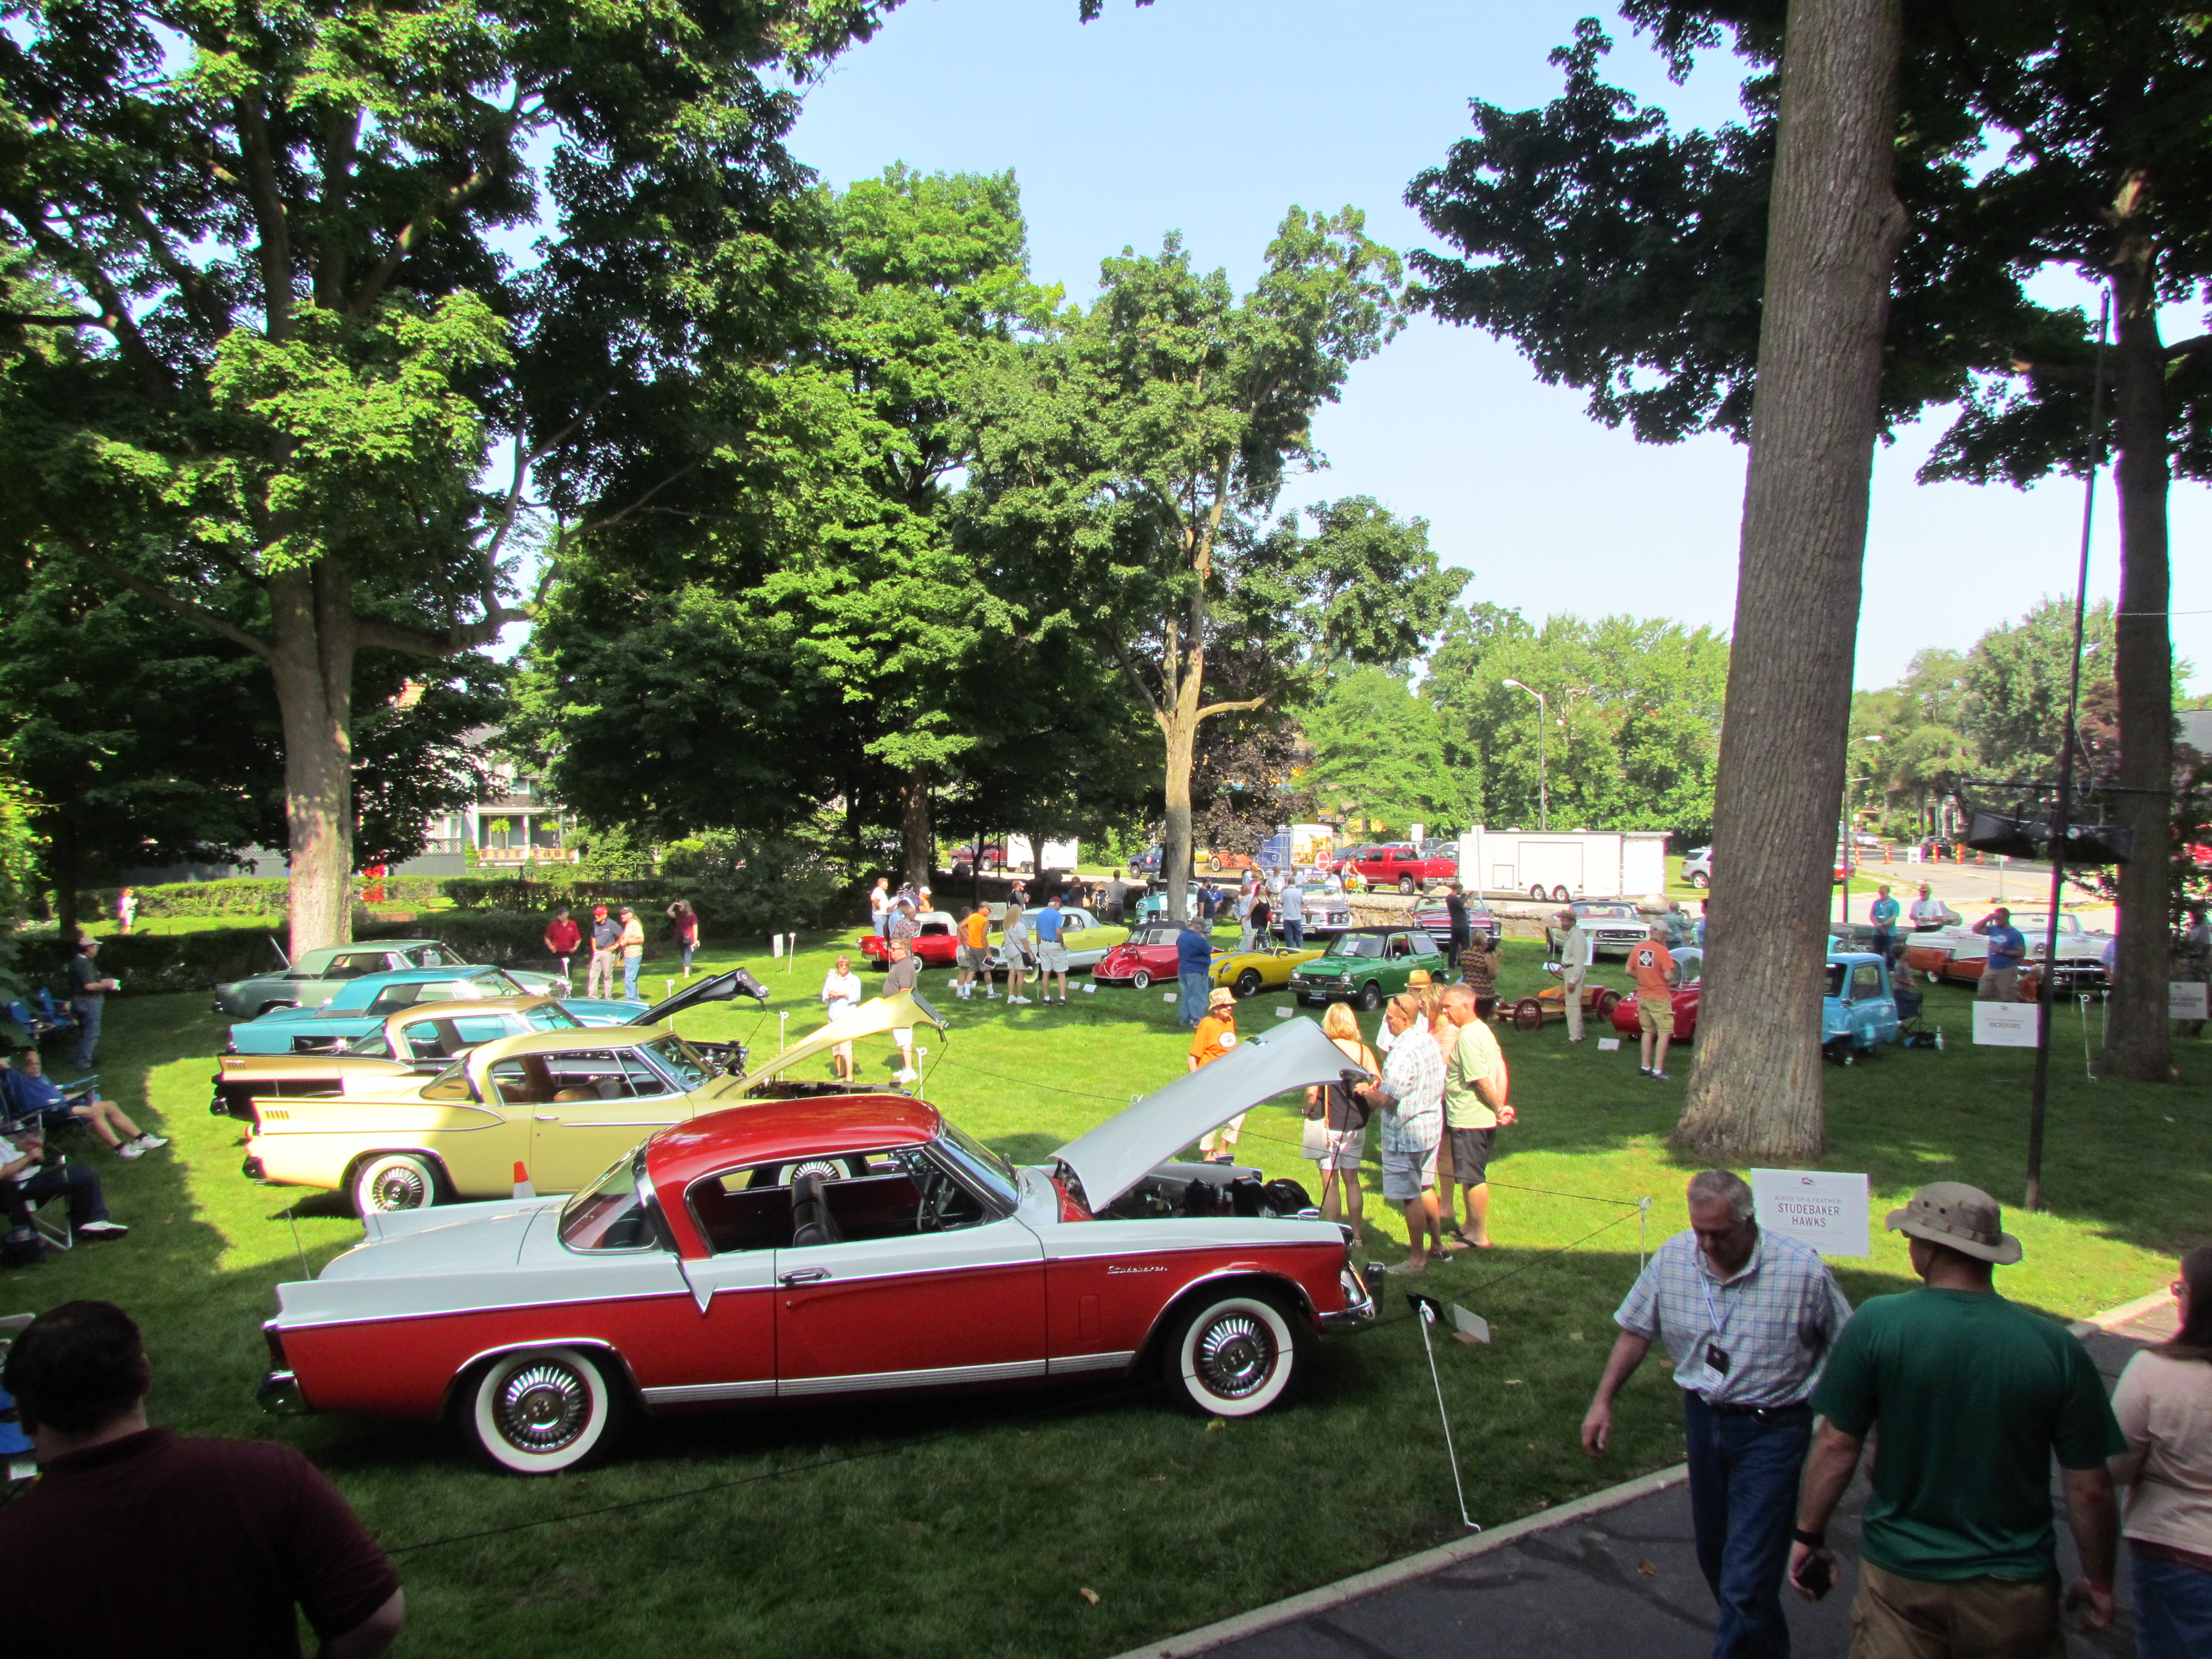 Copshaholm, Copshaholm concours gets off to a great start, ClassicCars.com Journal